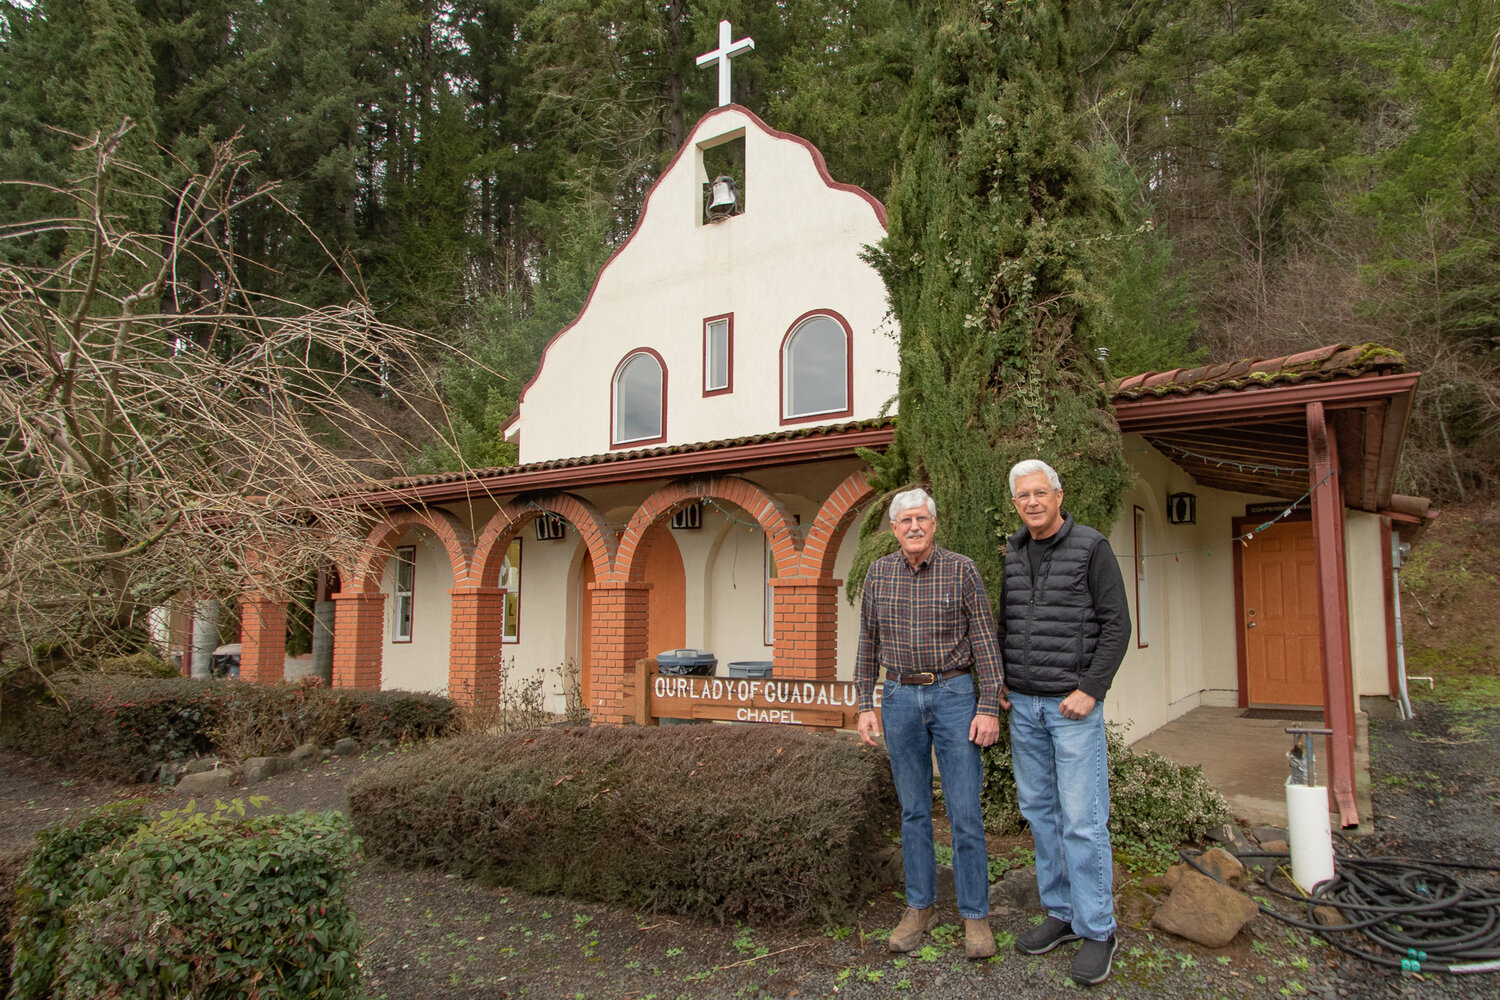 Owen Sexton for the Nisqually Valley News
Brothers Jack, left, and Bob DeGoede, stand, on Tuesday, Jan. 30, in front of the Our Lady of Guadalupe Chapel, which was built by their father, Hank. The chapel sits less than a mile from the DeGoede Bulb Farm in Mossyrock, which Jack and Bob just sold after retiring last summer. Below, a photo of Hank DeGoede, founder of DeGoede Bulb Farm in Mossyrock, hangs on a wall in his sons’ office at the Our Lady of Guadalupe Chapel.